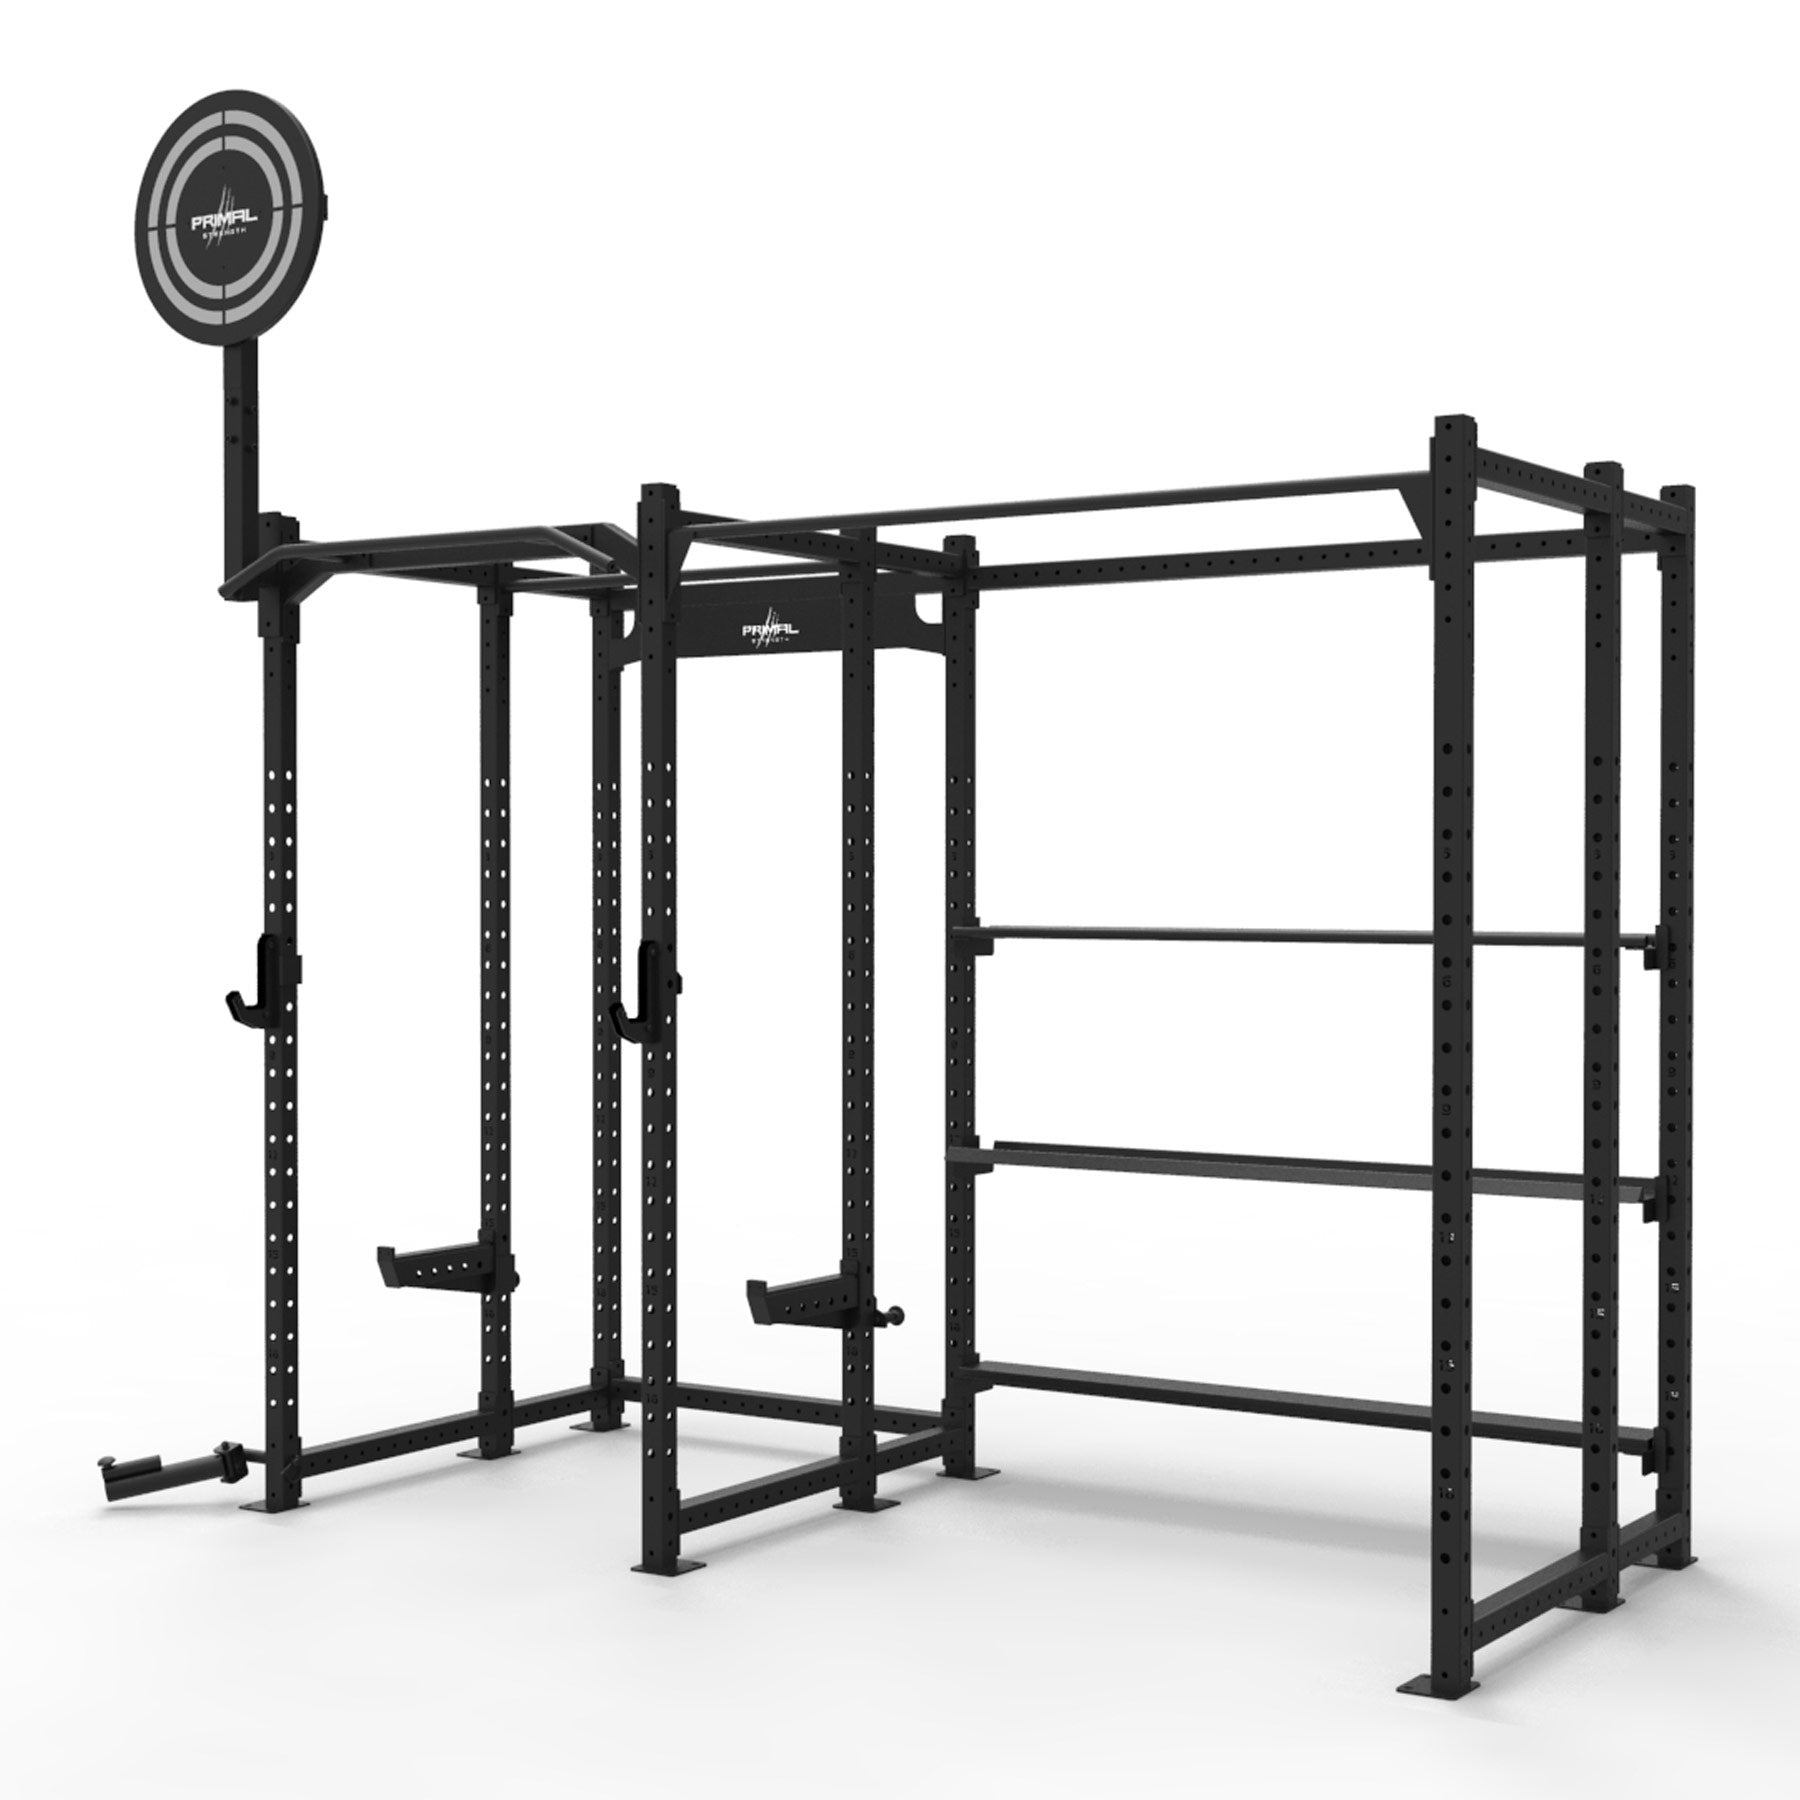 a group gym rack featuring storage and accessories for functional equipment